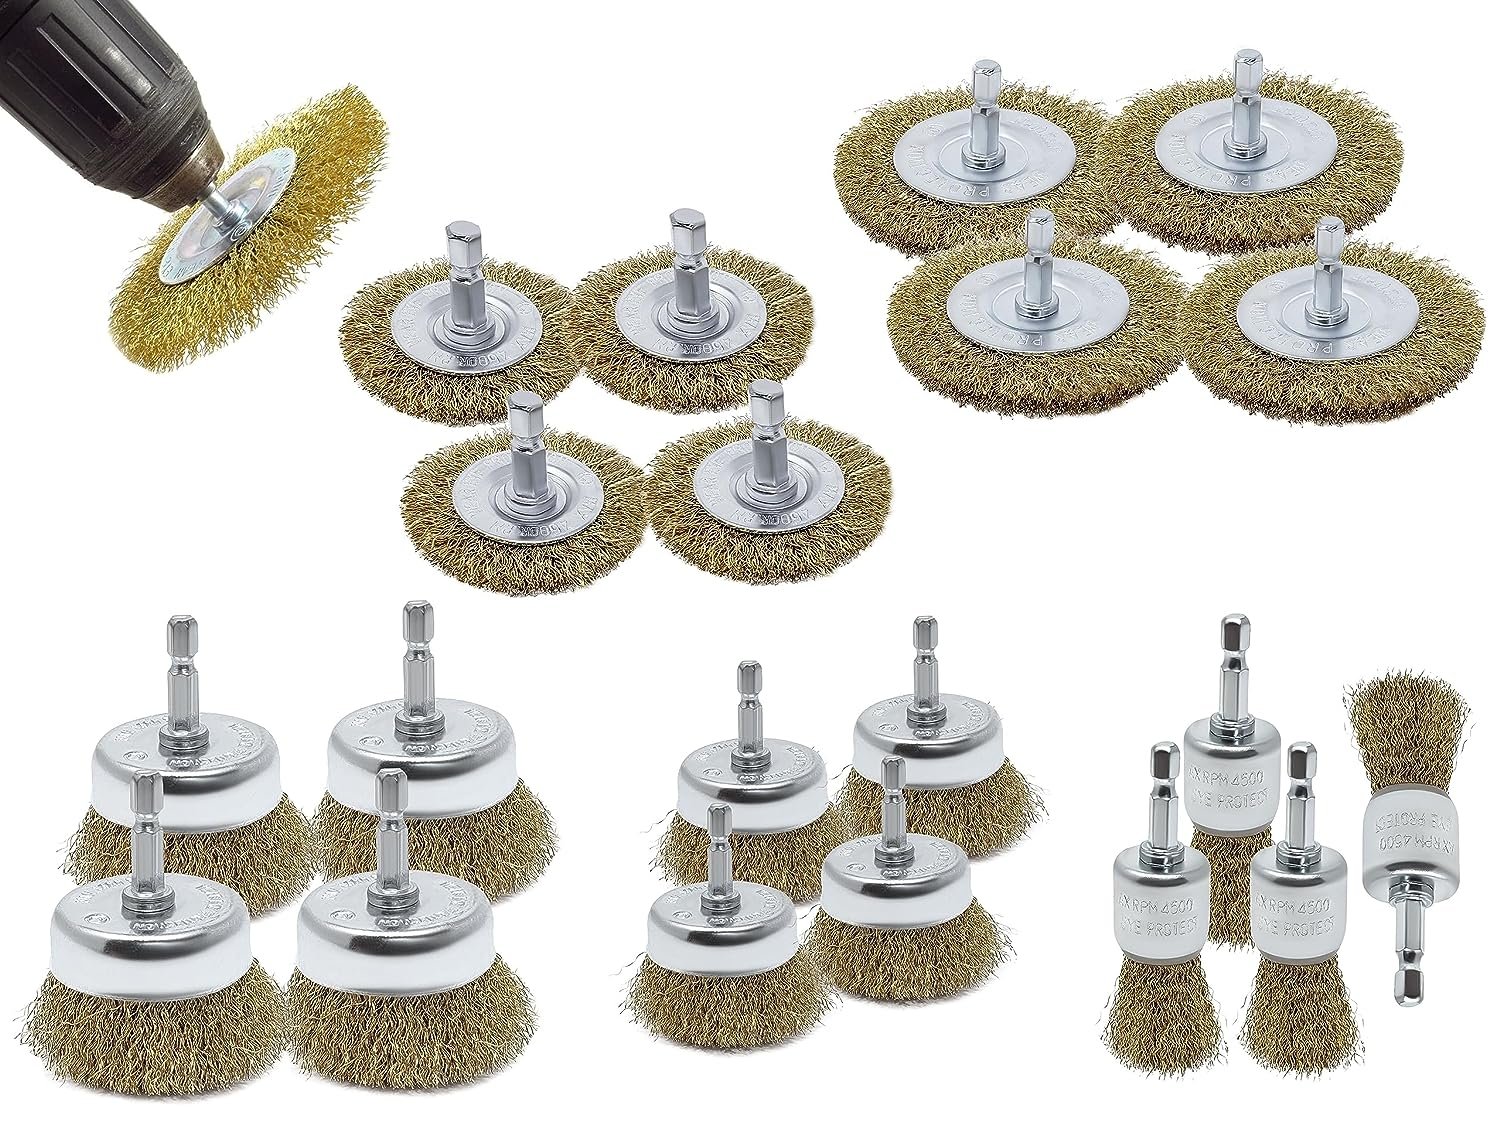 20pk Wire Brush Drill Attachment Set Brass Coated for Cleaning Rust 1/4" Hex Shank Fits Impact Driver